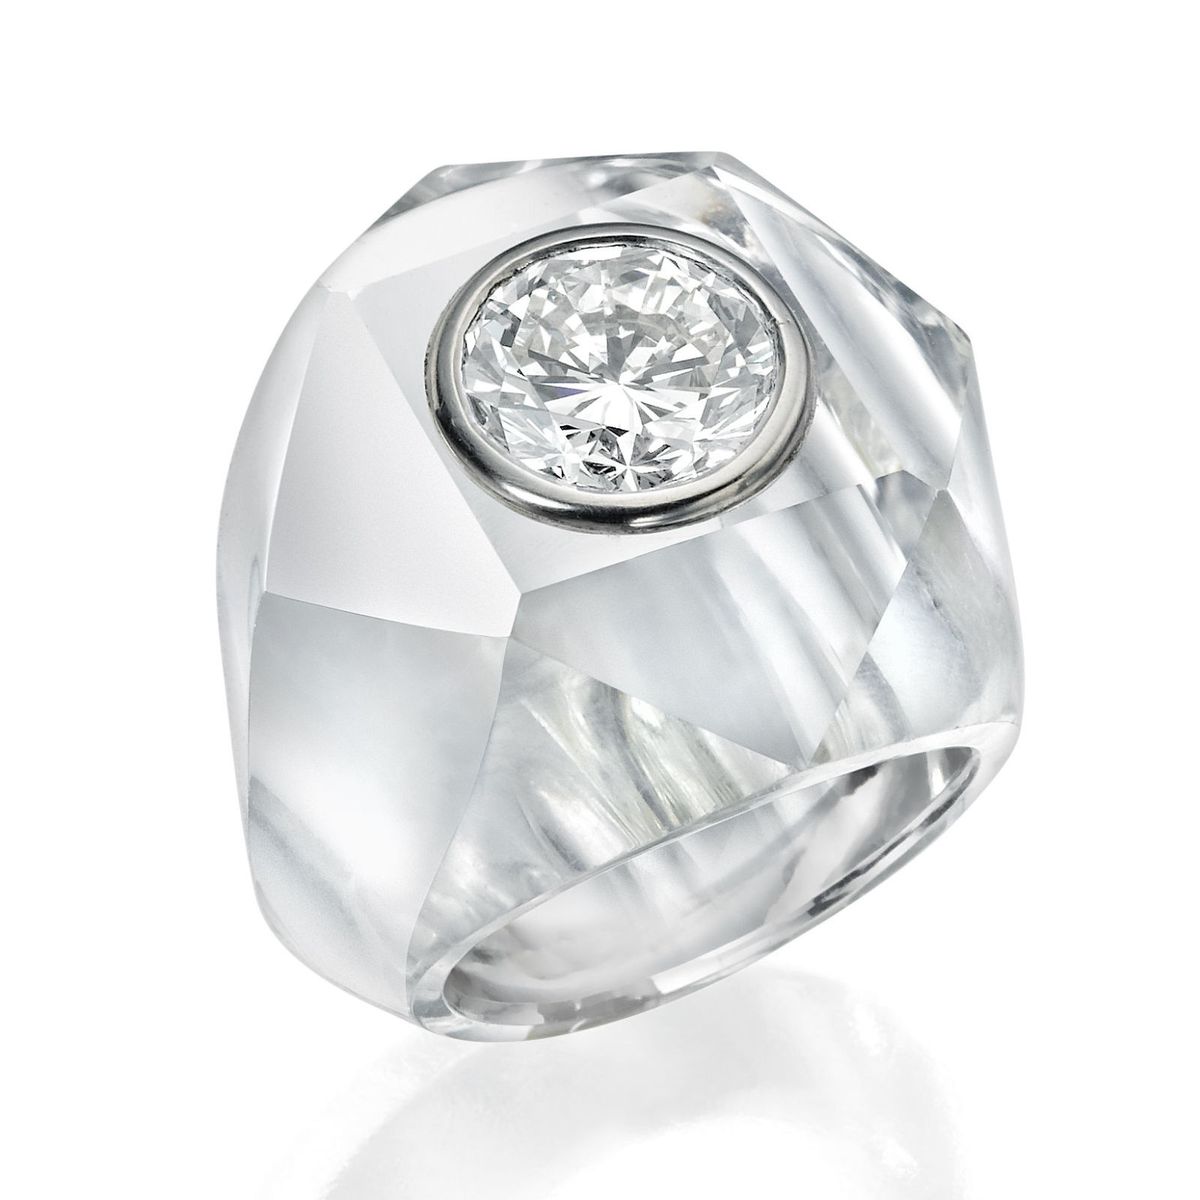 White, Jewellery, Diamond, Photography, Watch, Transparent material, Gemstone, Crystal, Mineral, Silver, 